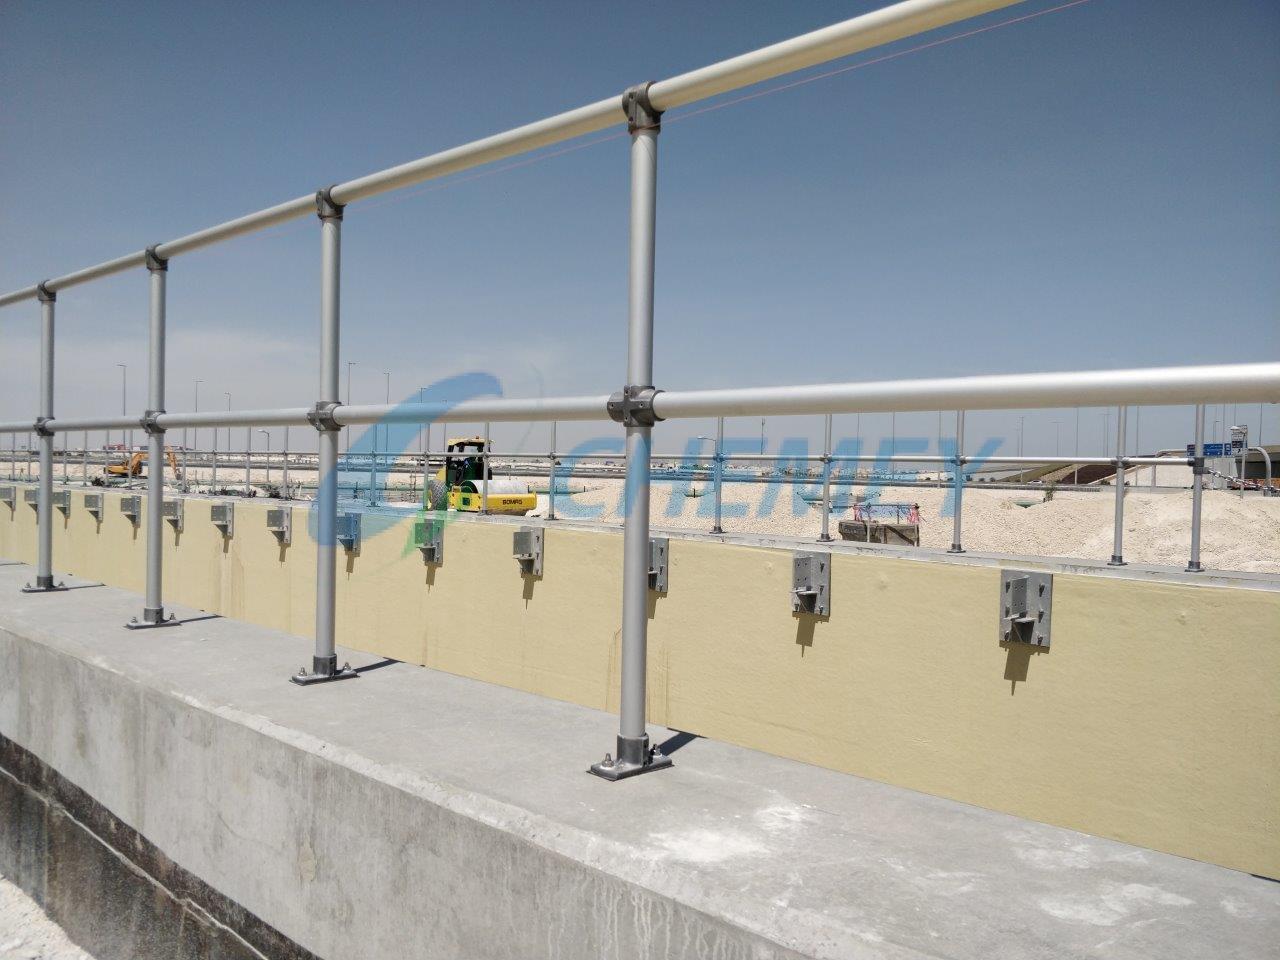 Modular Aluminum Handrails: High on Endurance, low in Cost of Ownership